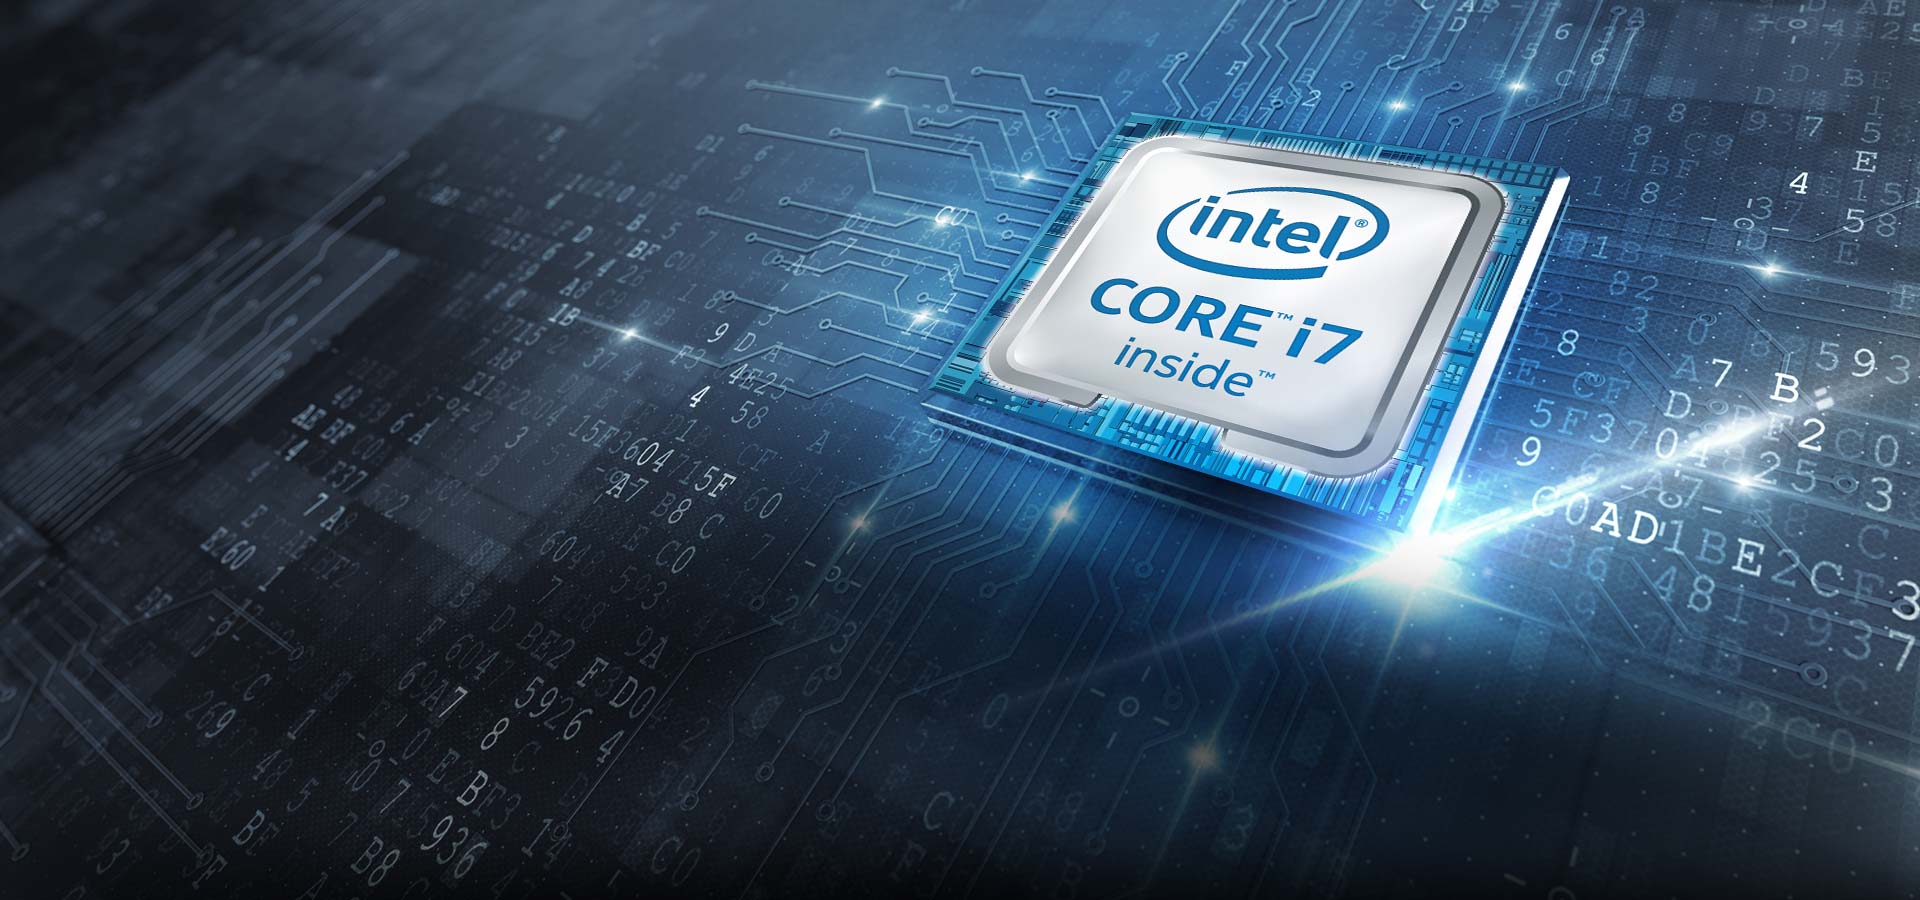 An Expert’s Guide to Choosing the Right Intel i7 vPro CPU